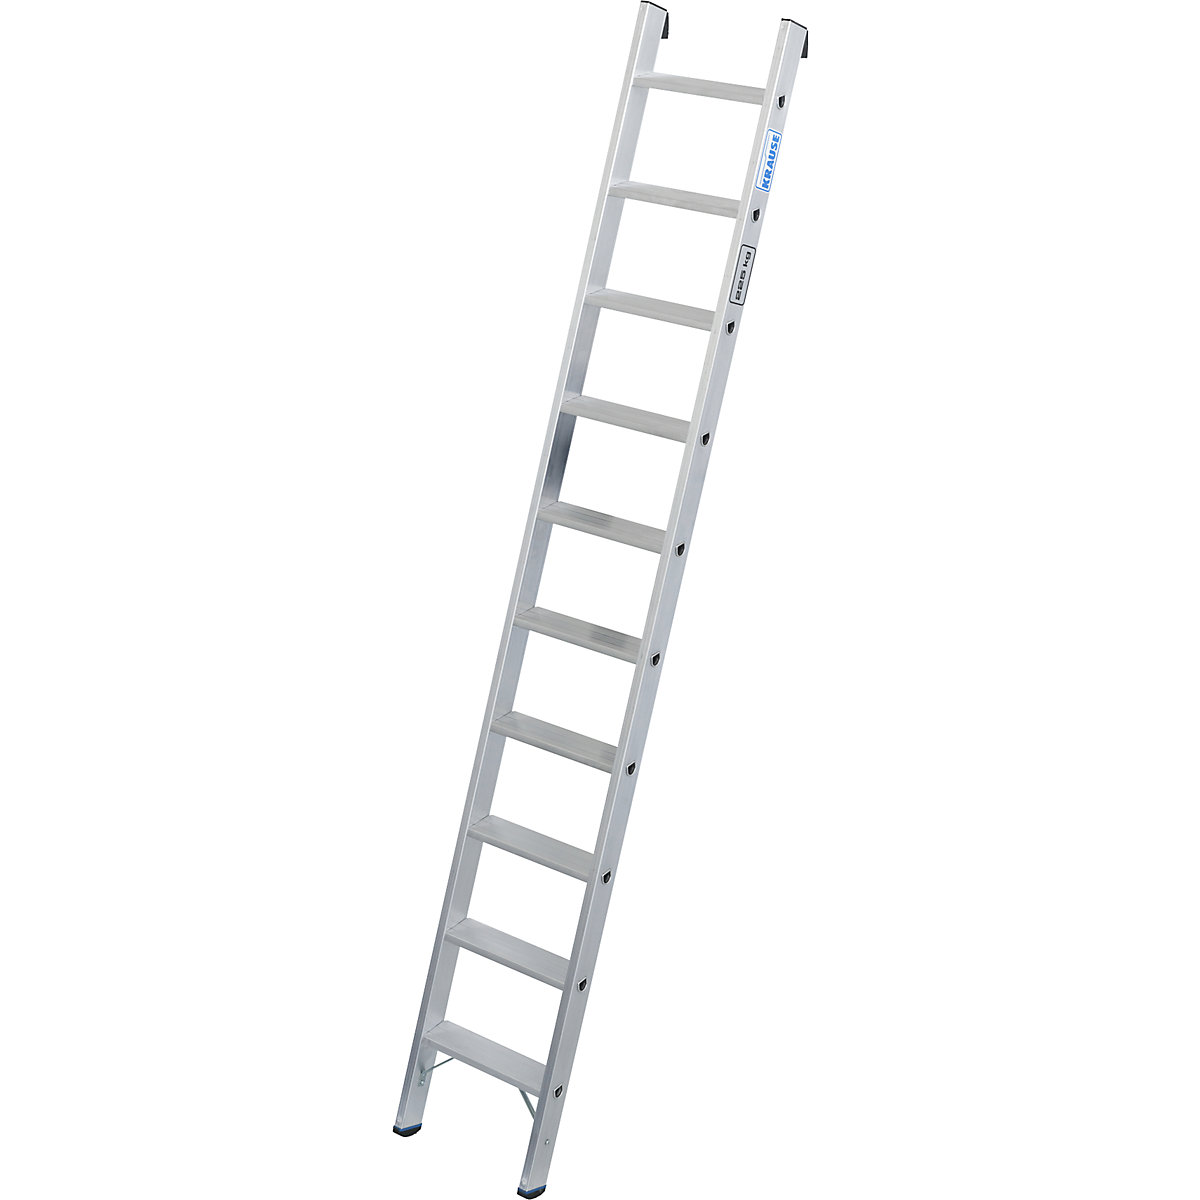 Heavy duty lean to ladder – KRAUSE, 80 mm aluminium steps, up to 225 kg, 10 steps-1